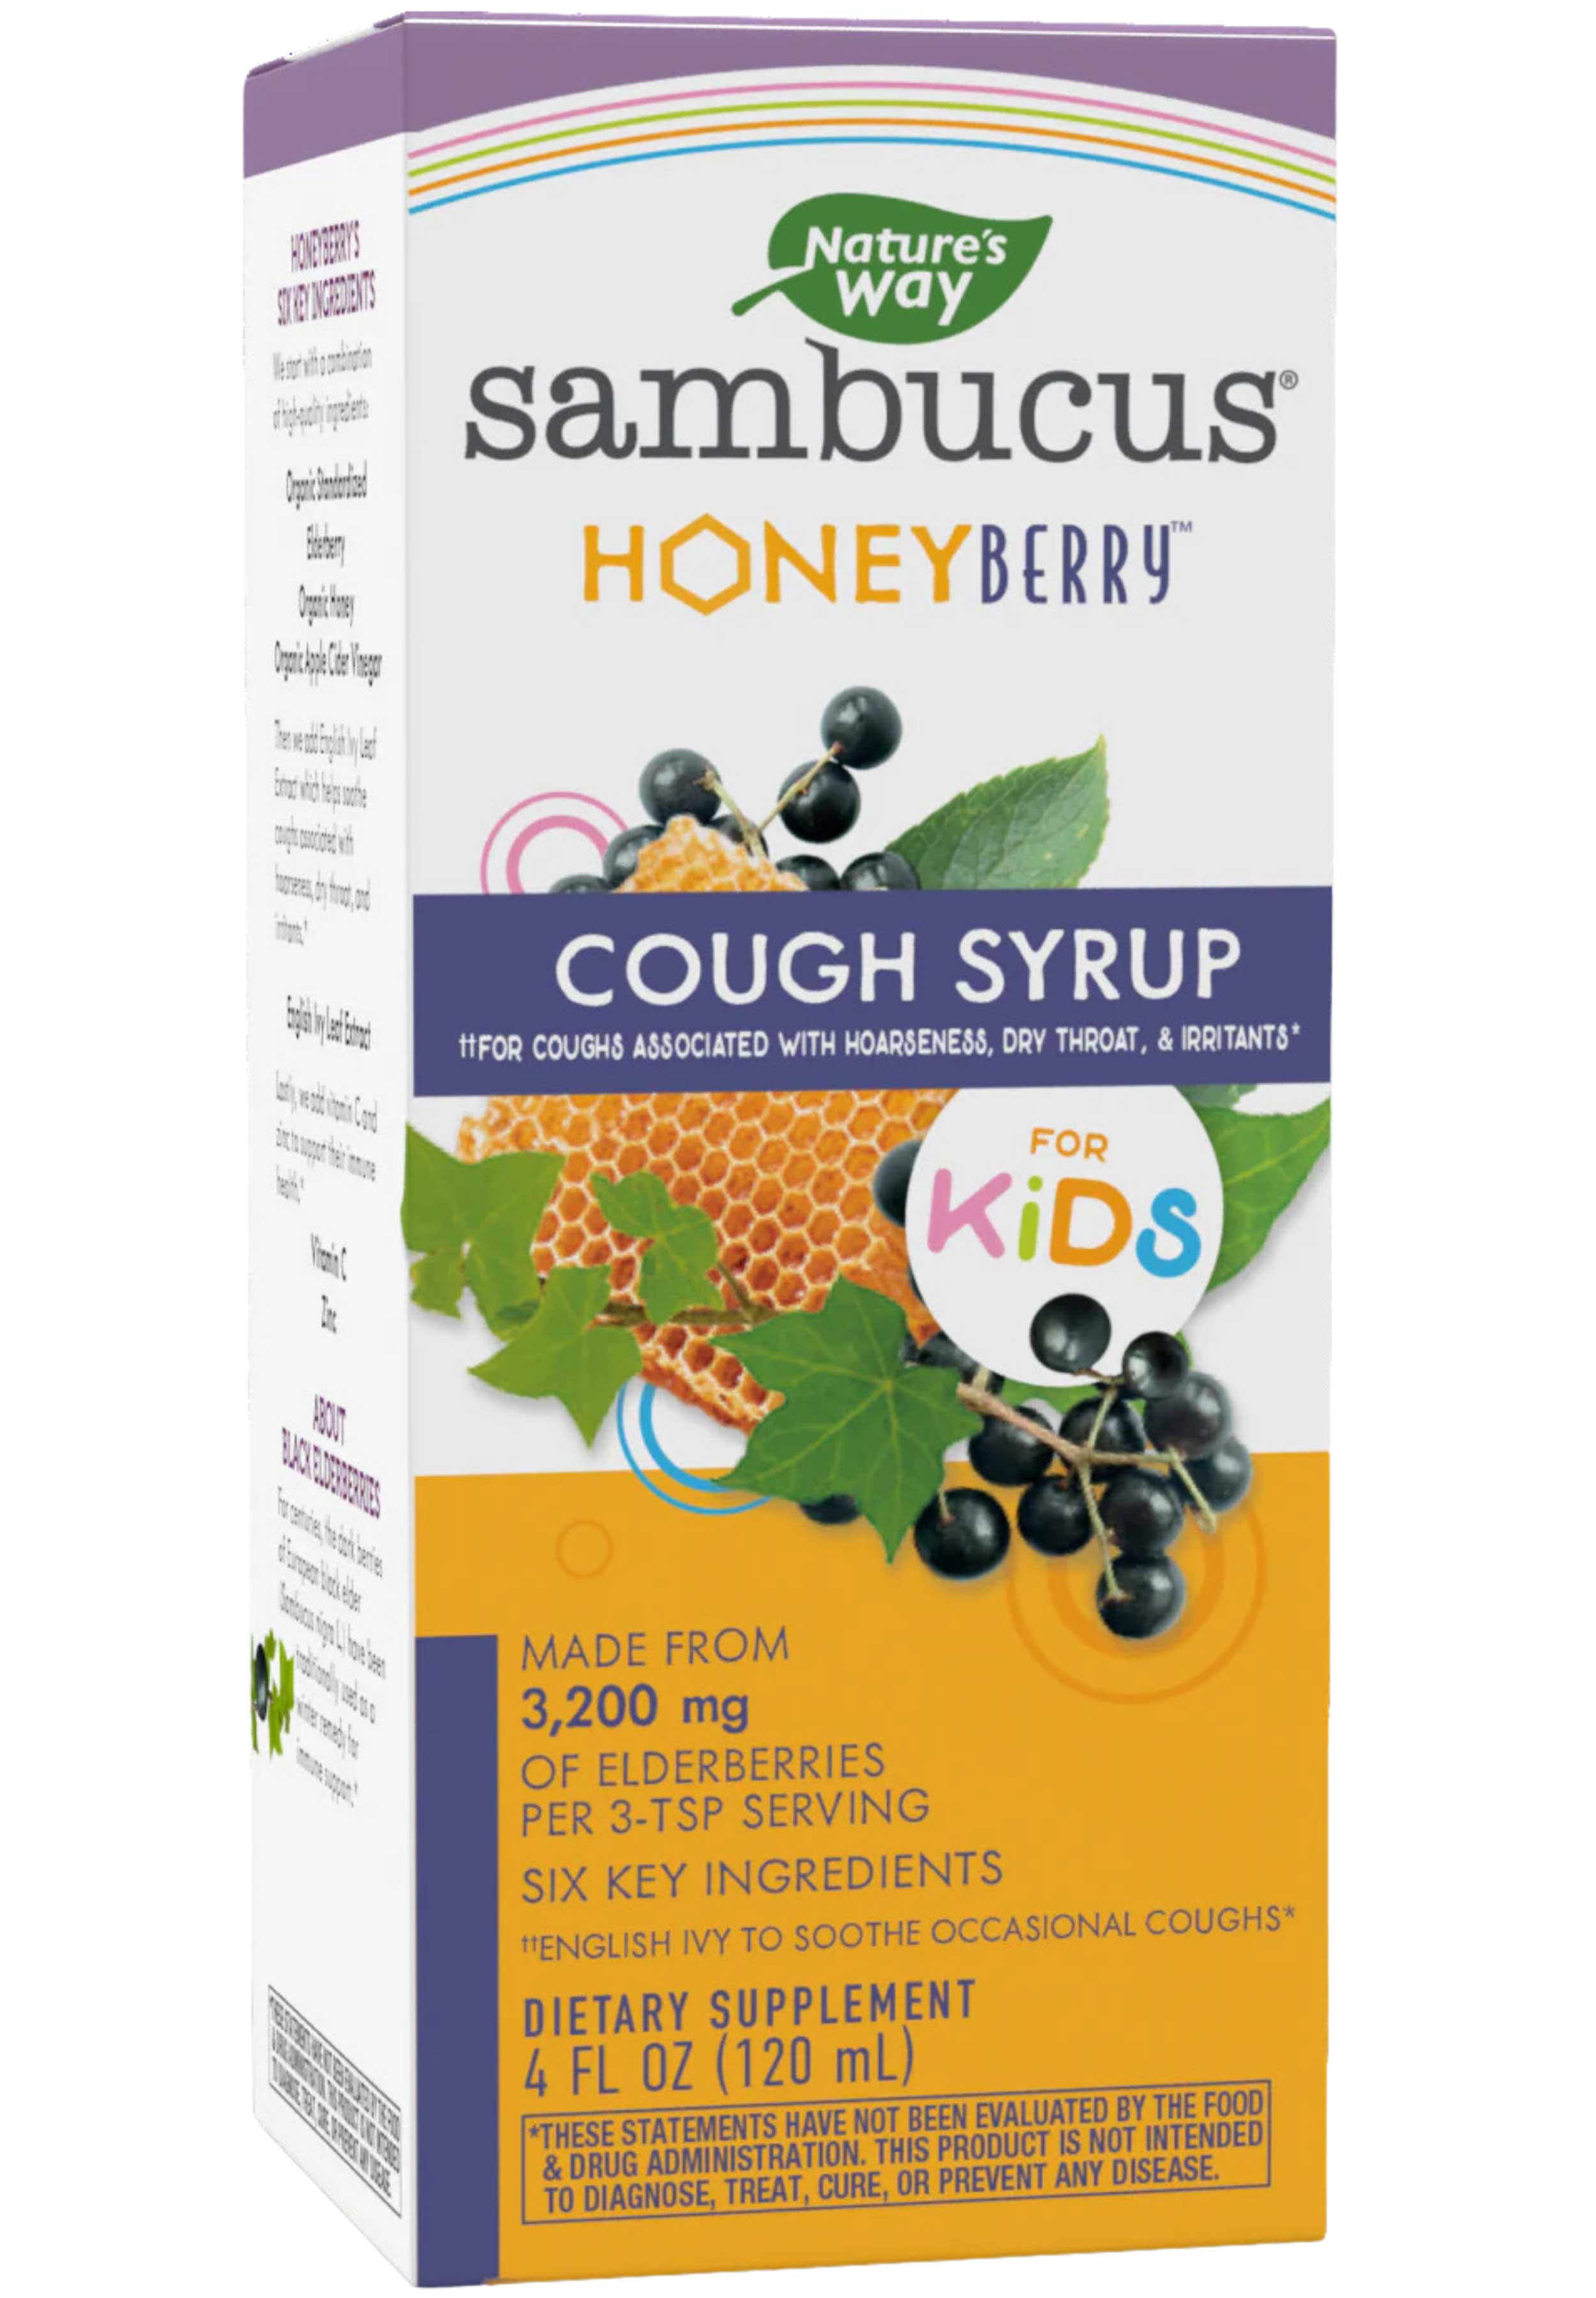 Nature's Way Sambucus HoneyBerry Cough Syrup for Kids